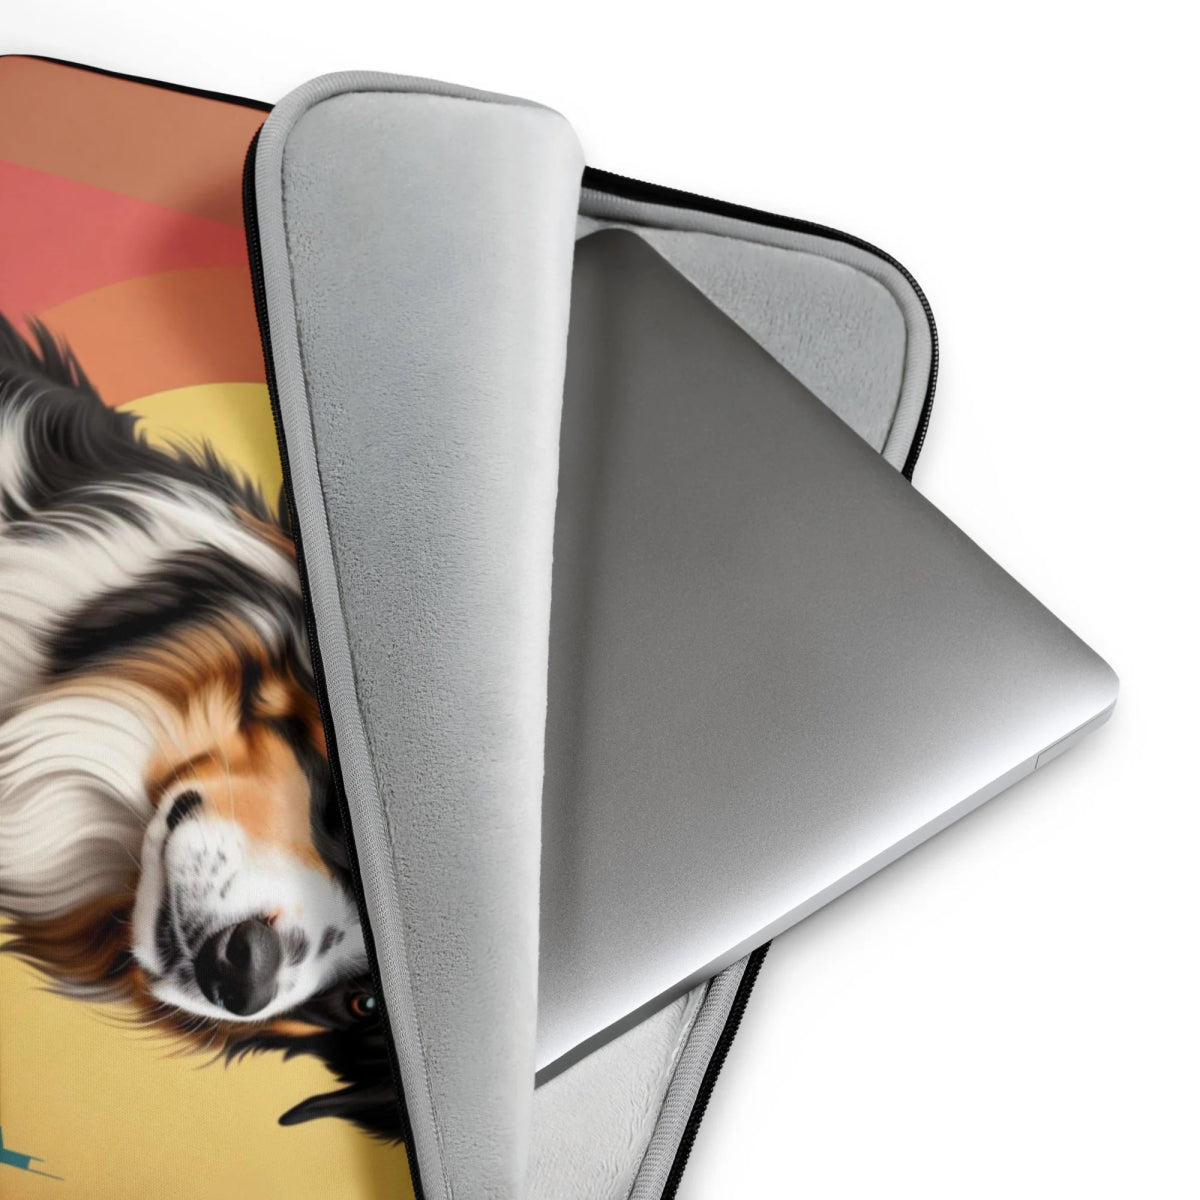 Border Collie in the City Laptop Sleeve - Funny Nikko